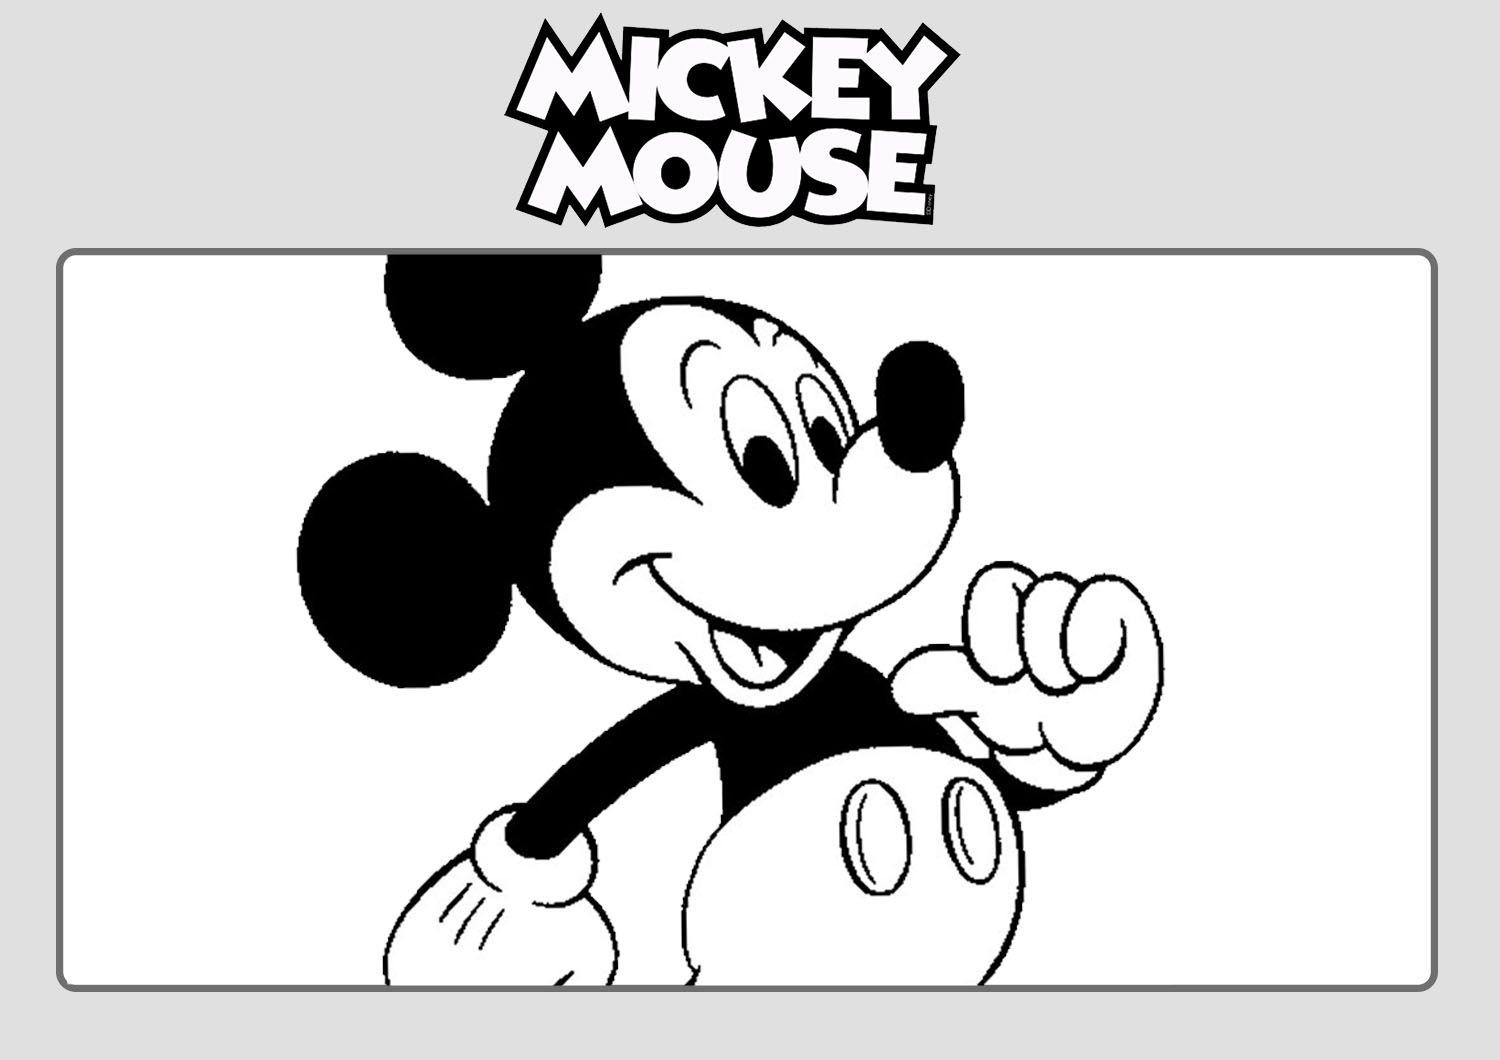 Dibujos De Mickey Mouse Para Colorear Personalized with your childs name on the logo! dibujos de mickey mouse para colorear